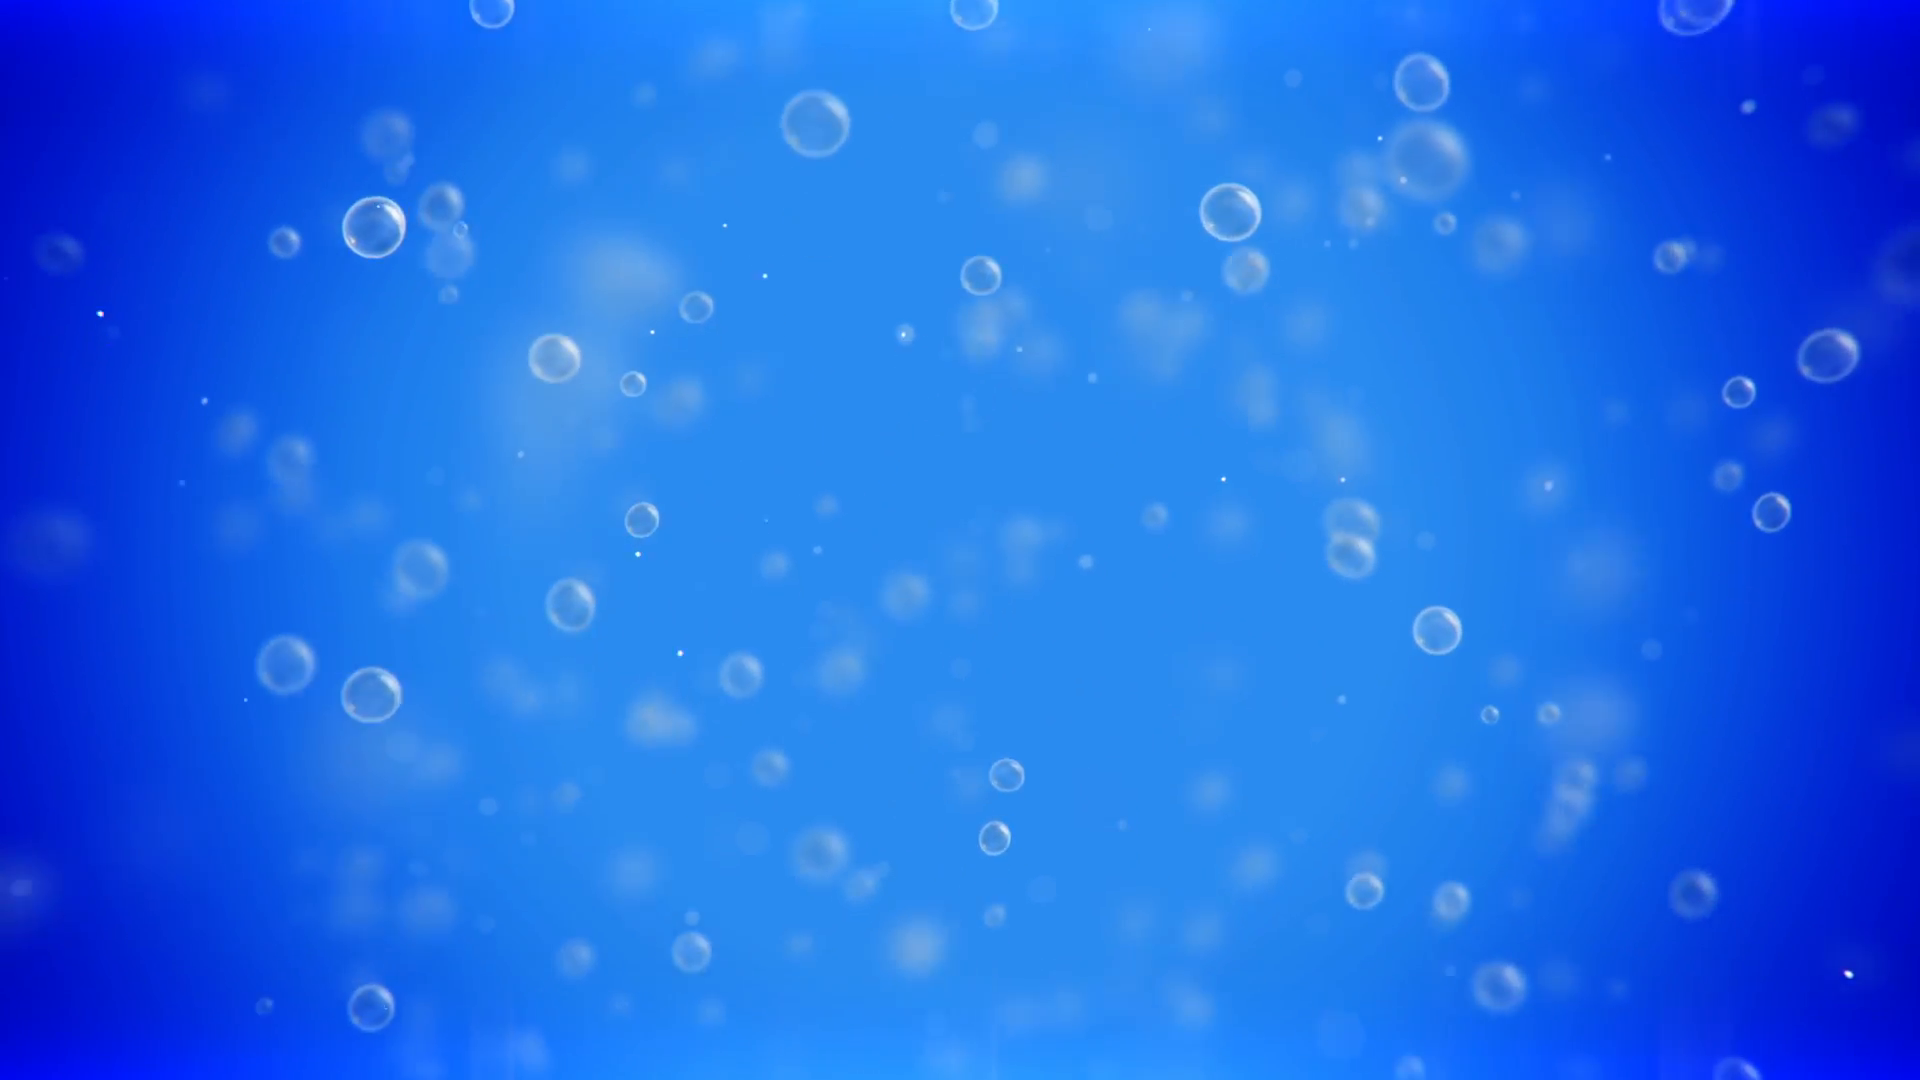 Bubbles floating up animation on blue background with Oxygen symbol ...